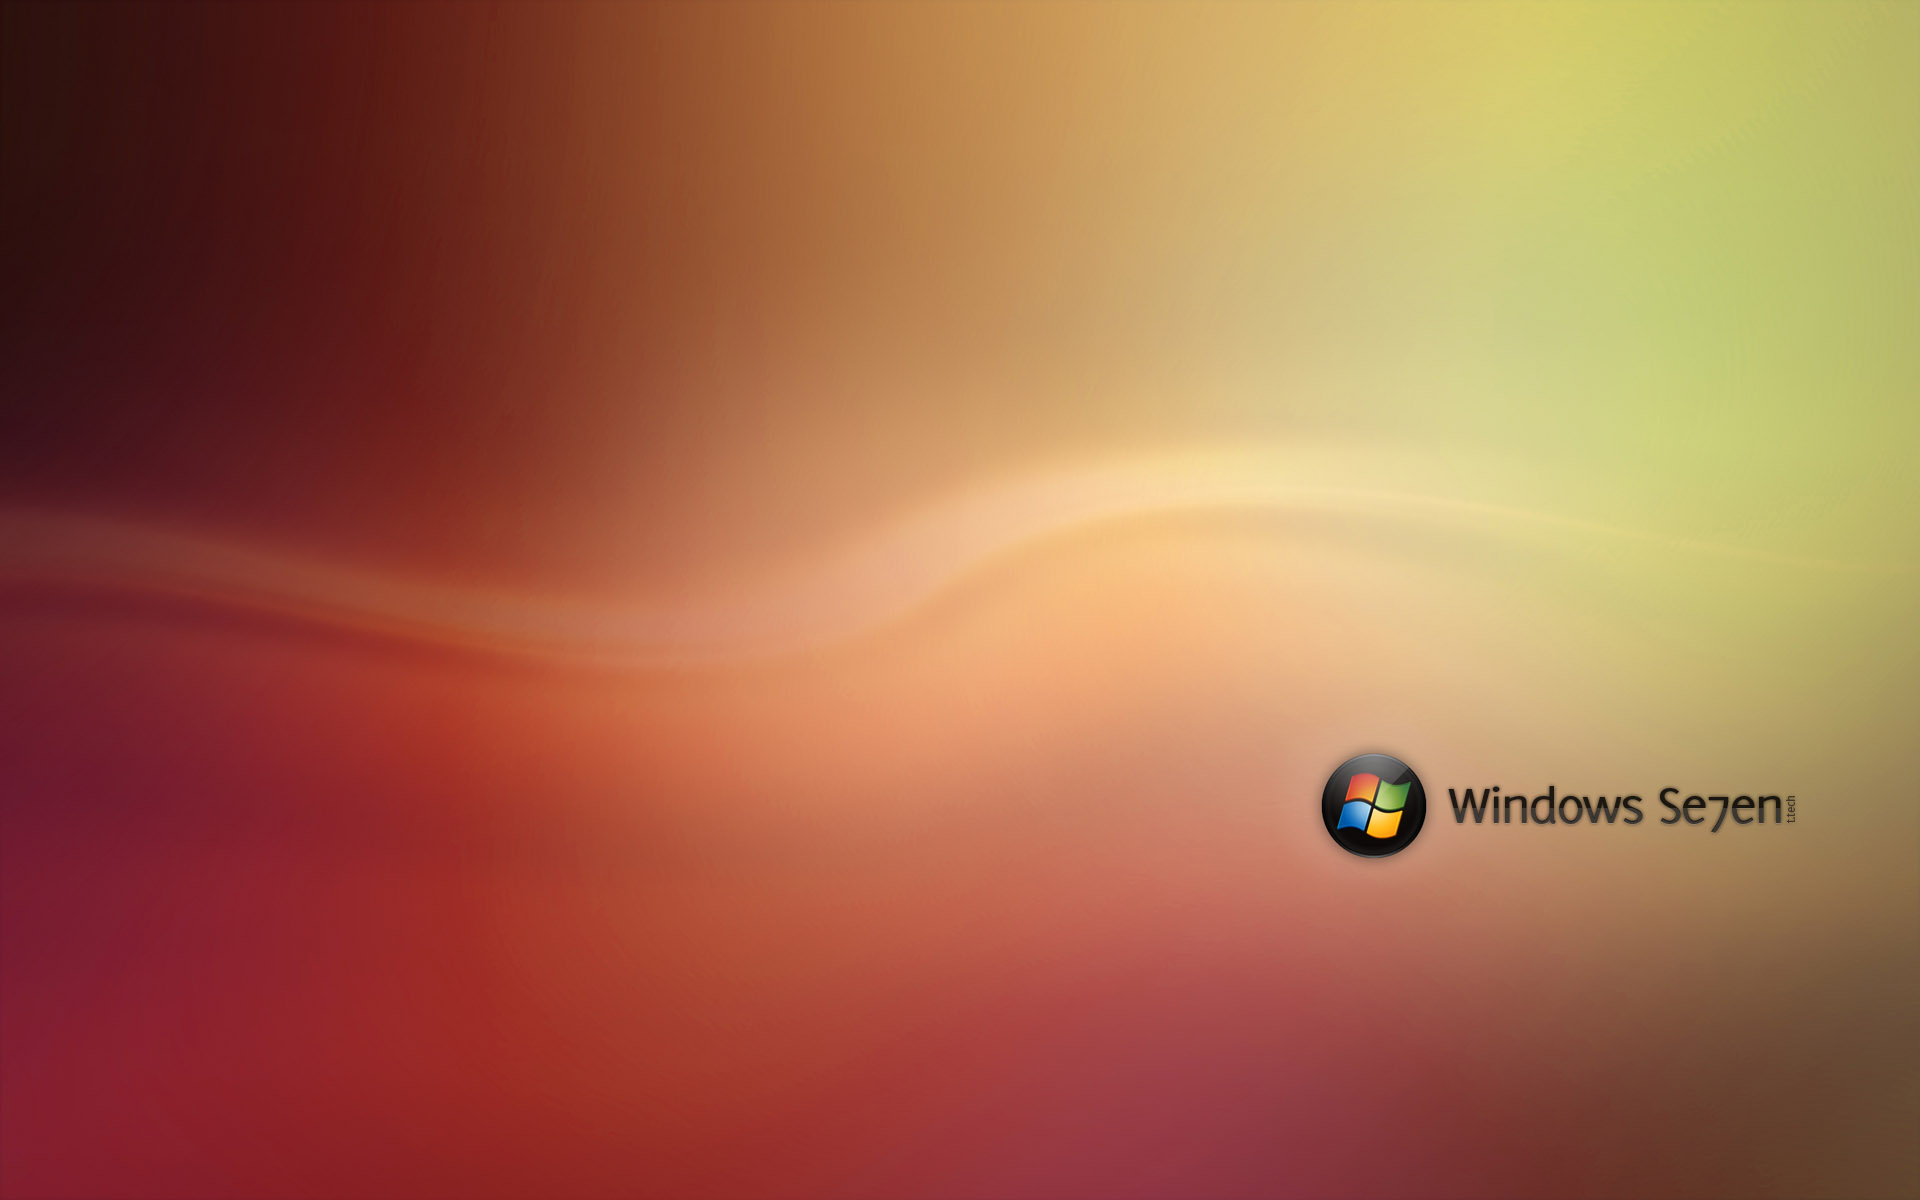 windows 7 red wallpapers and images - wallpapers, pictures, photos